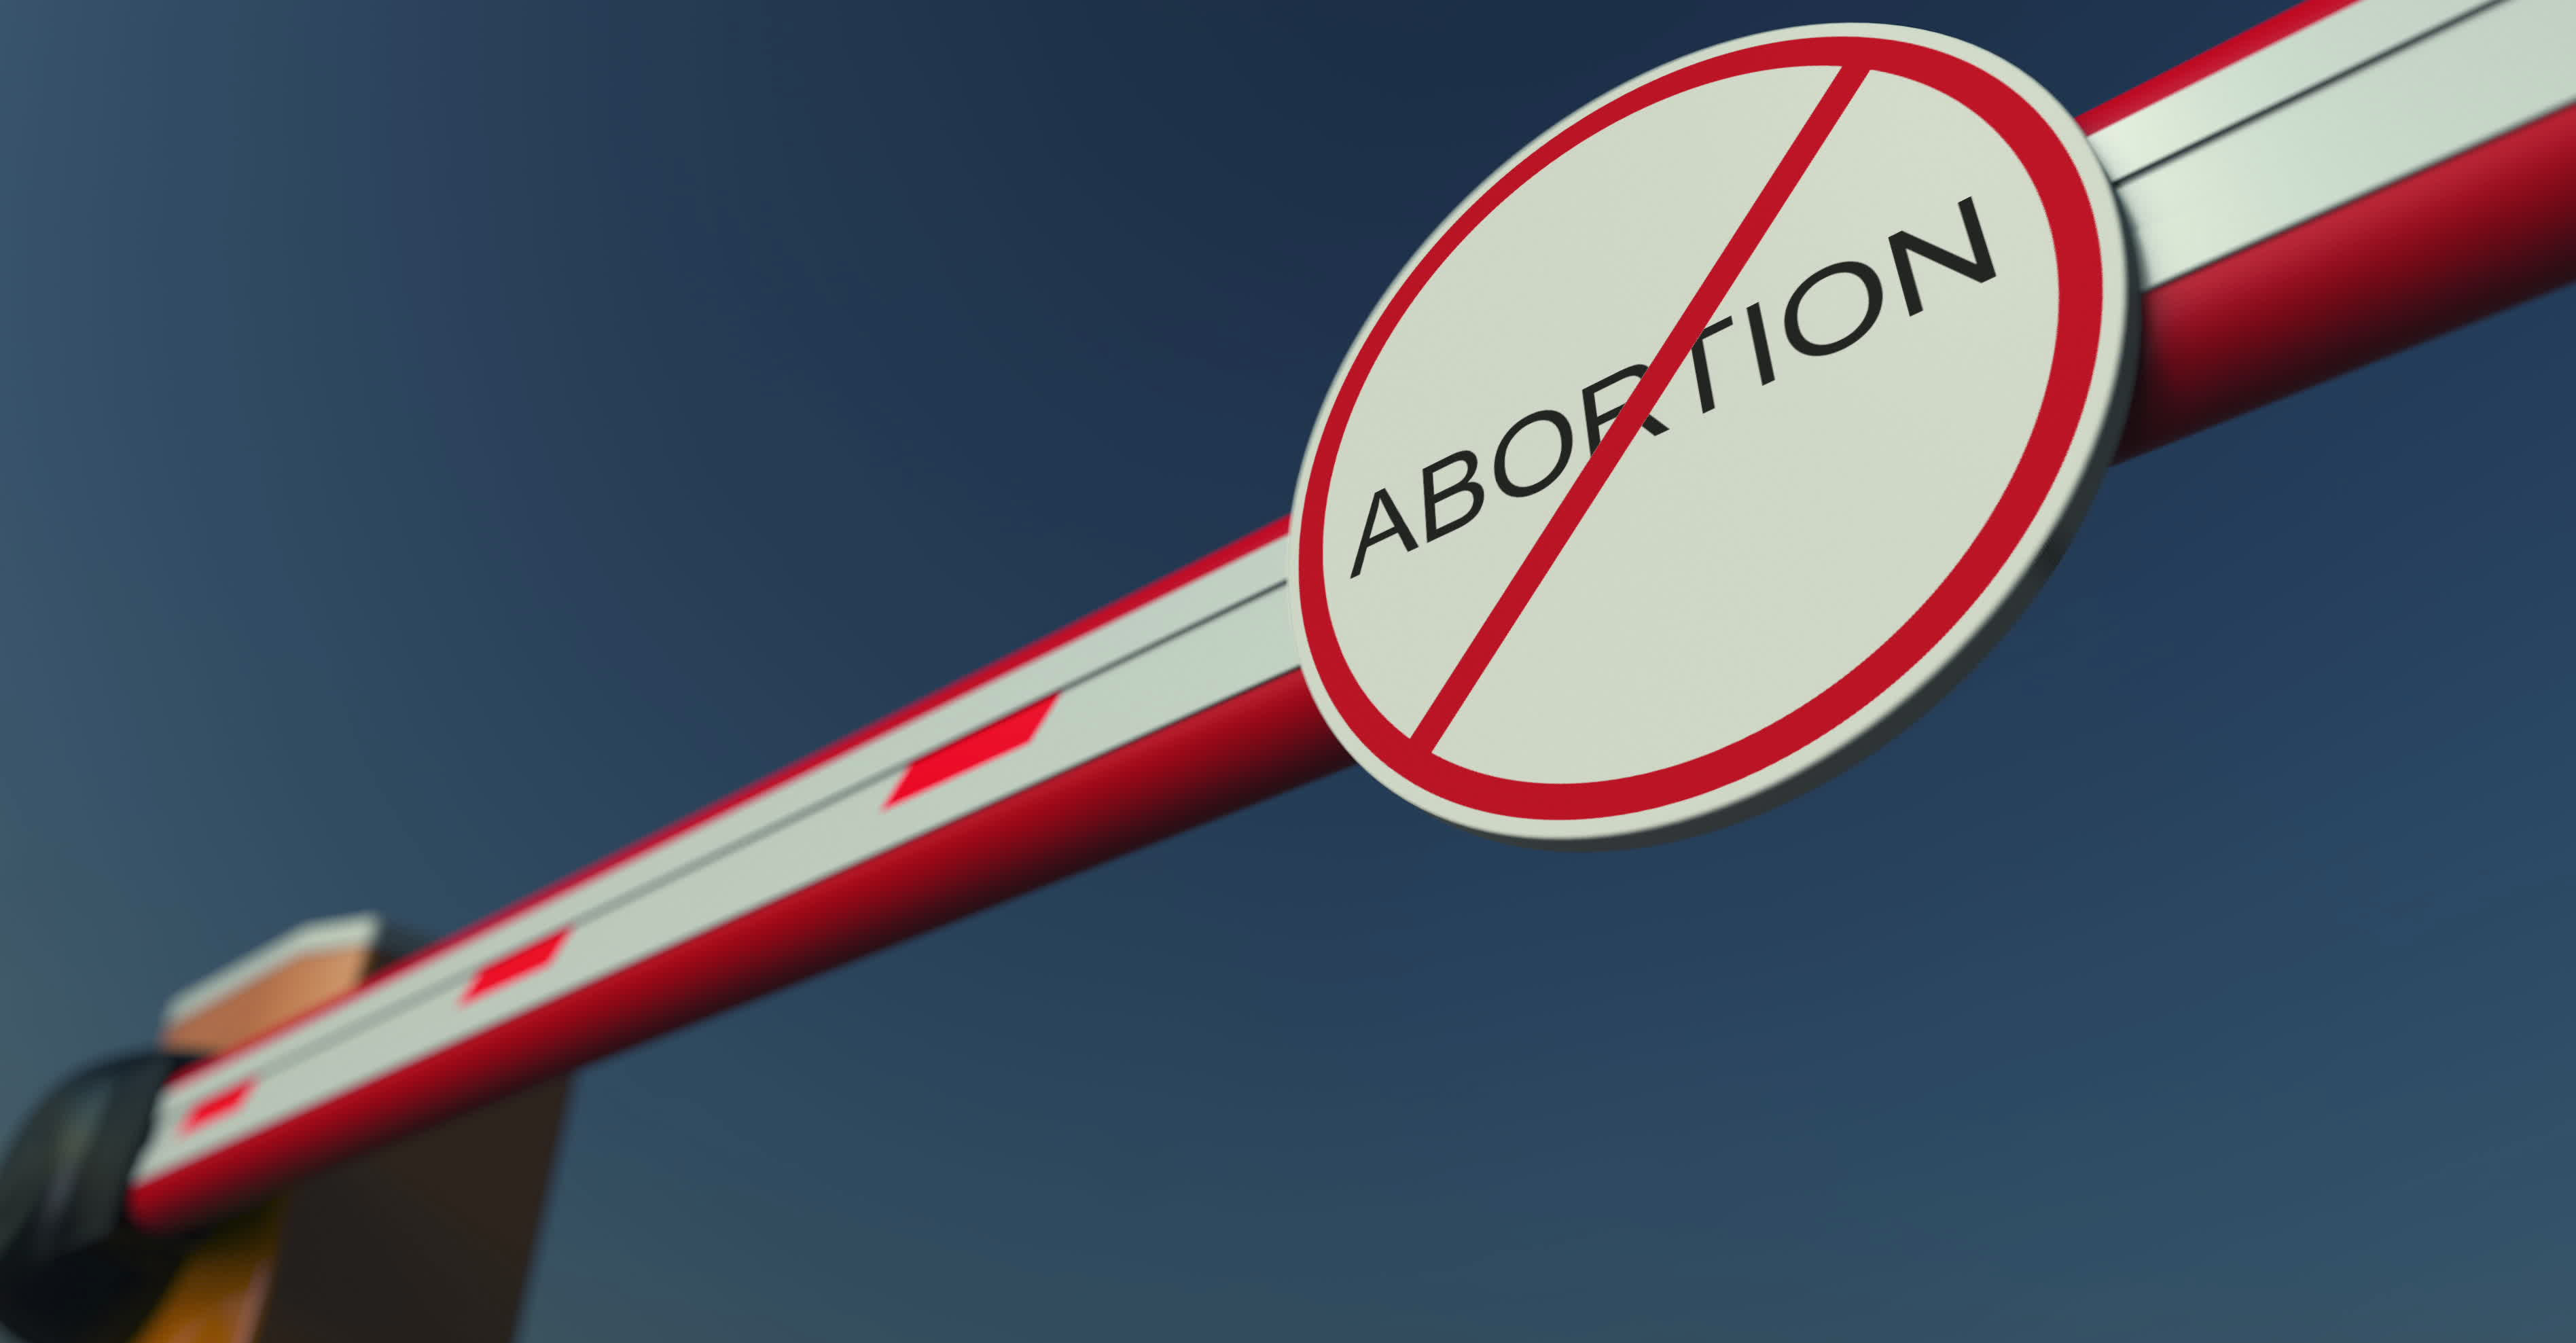 Abortion sign with line through it (Shutterstock/Novikov Aleksey)